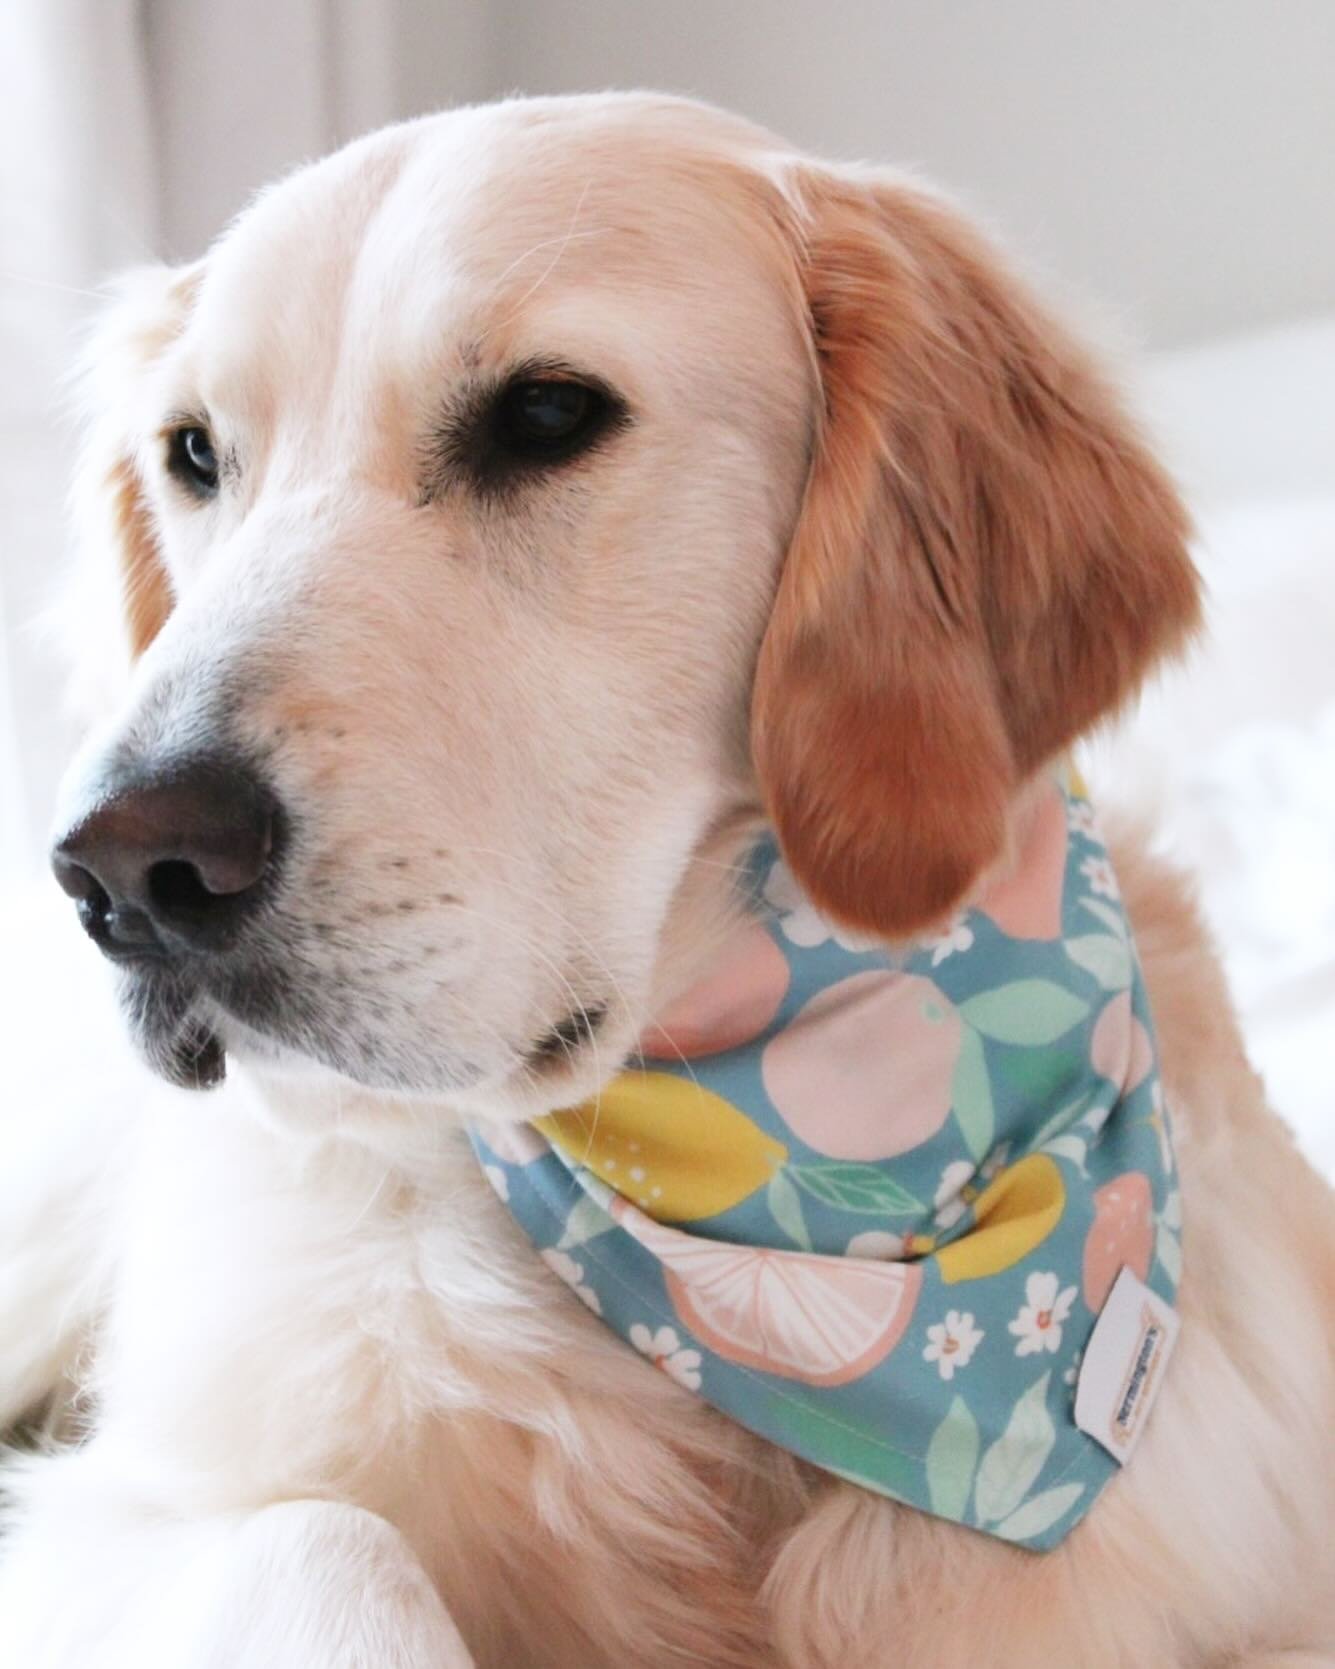 Sandy Paws and Salty Kisses are on the horizon! 😎☀️ Are you ready for summer? Because we can&rsquo;t wait to show off what&rsquo;s been blossoming behind the scenes. 🌺 Oh yes fur-ends! New summer patterns arrived and we can&rsquo;t wait to share th